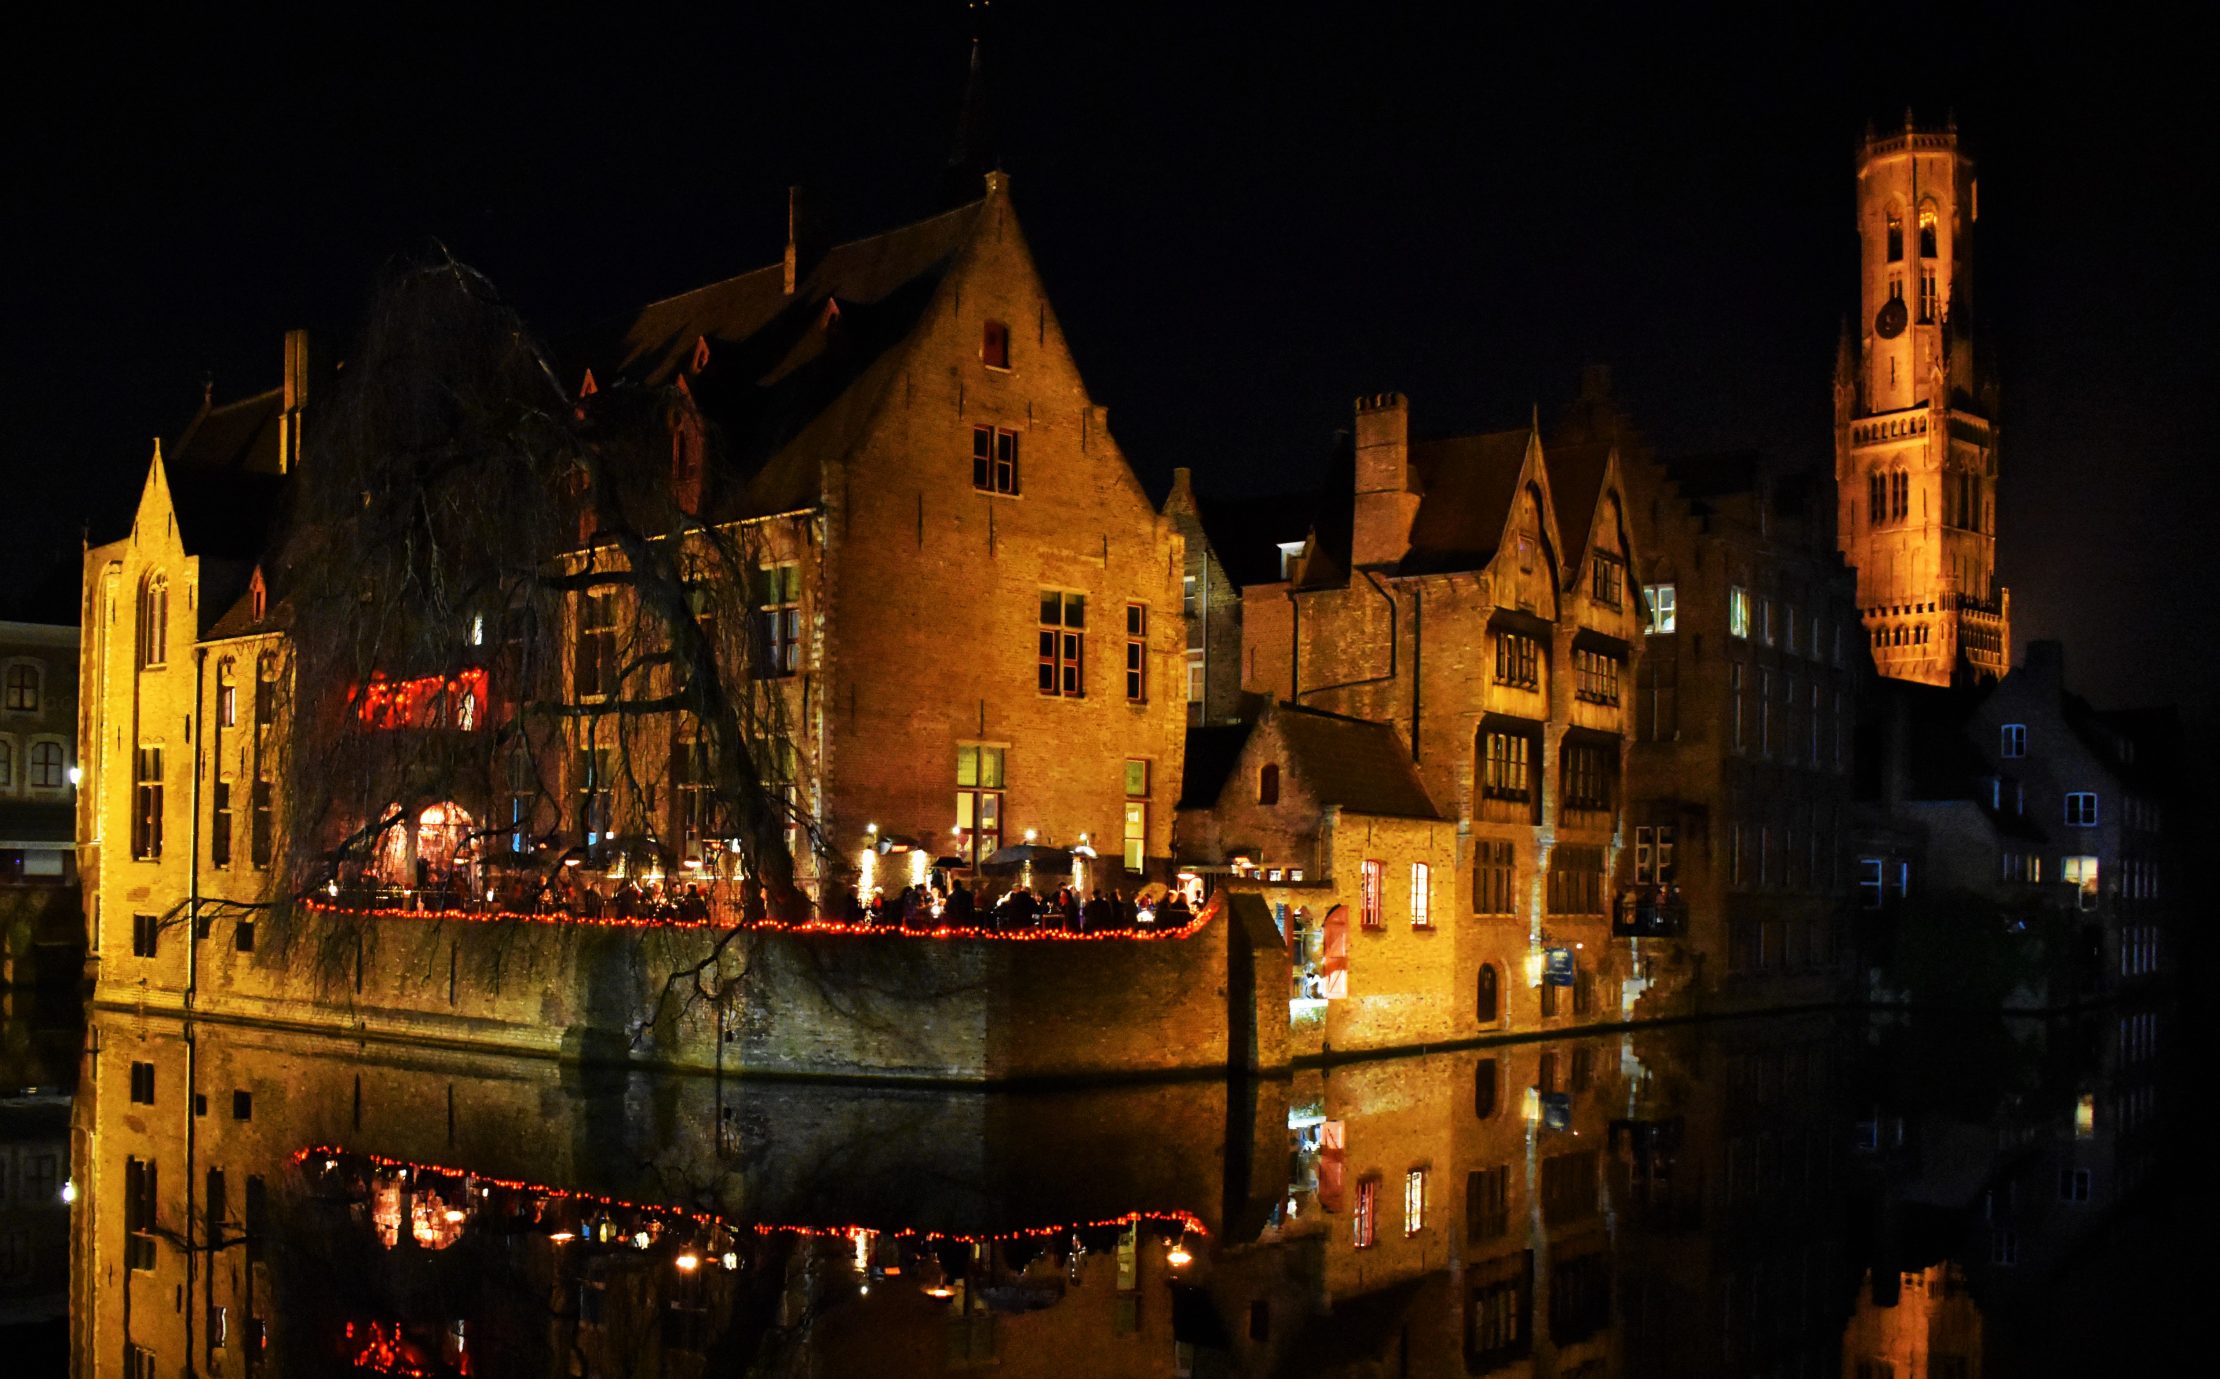 Romantic cafes along the canals